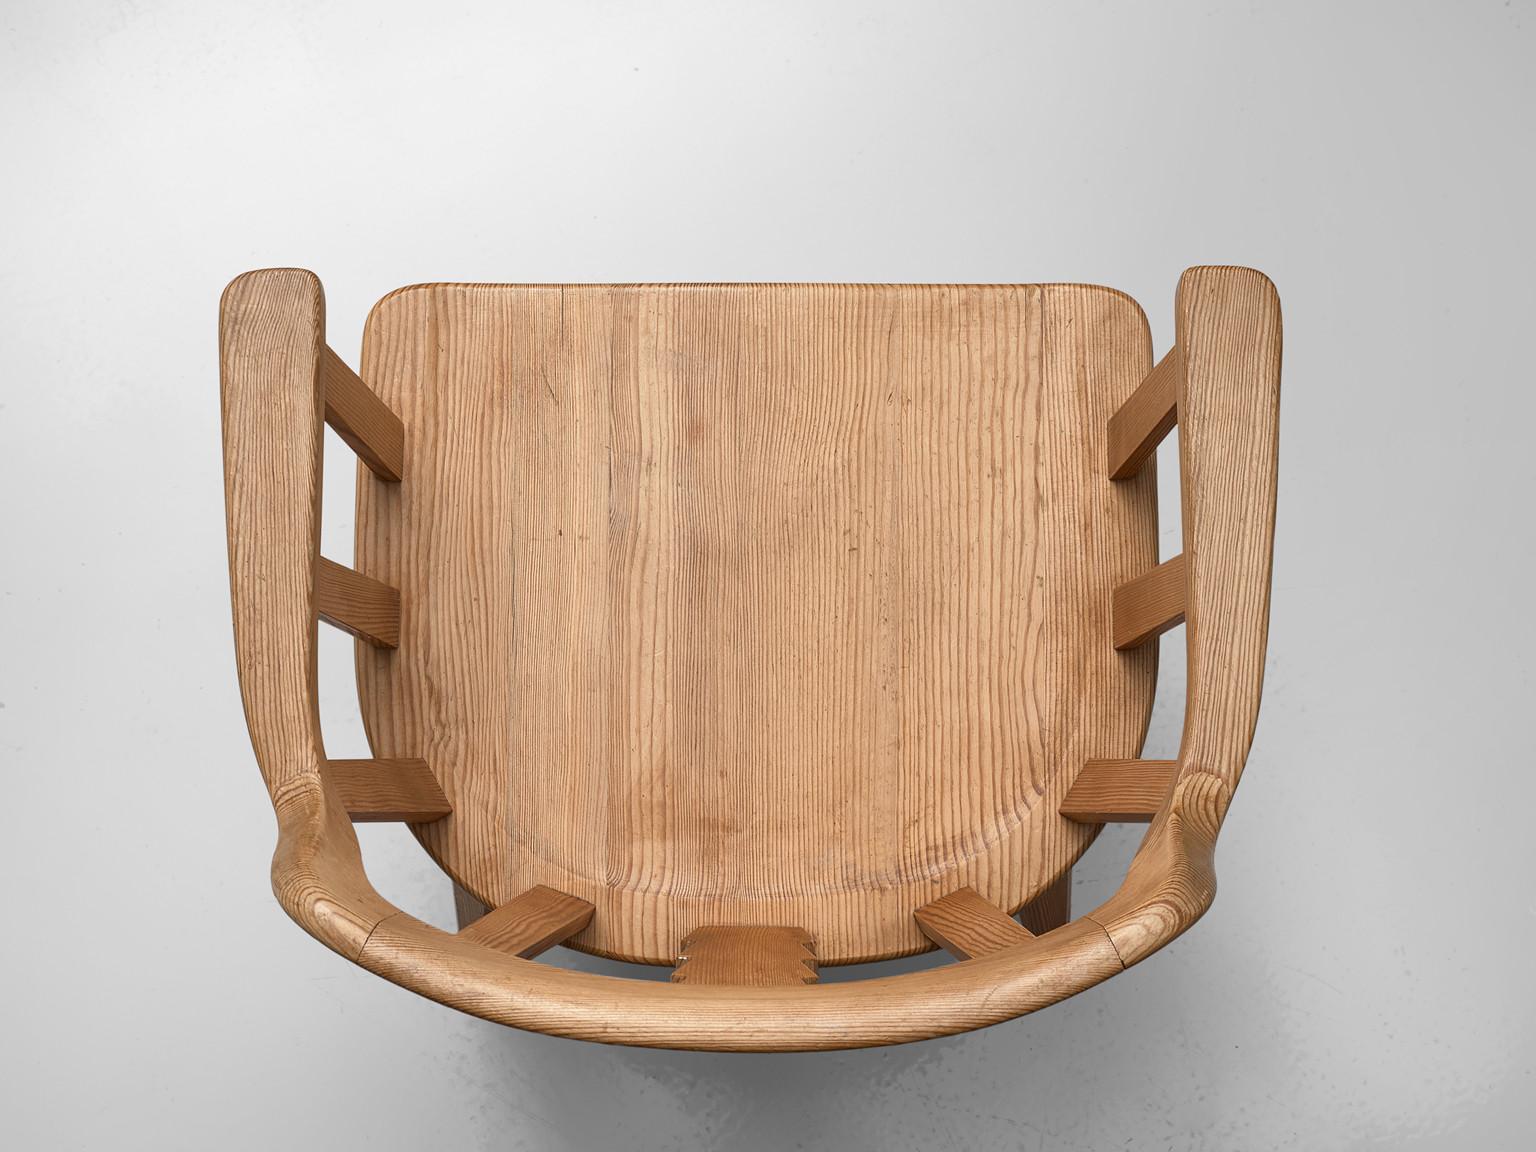 Nordiska Kompaniet, pair of armchairs model 'Ekerö, pine, Sweden, 1930s

Elegant pair of armchairs by Nordiska Kompaniet from the 1930s. The ‘Ekerö’ furniture line that also includes dining chairs and a sofa is characterized by vertical slats in the